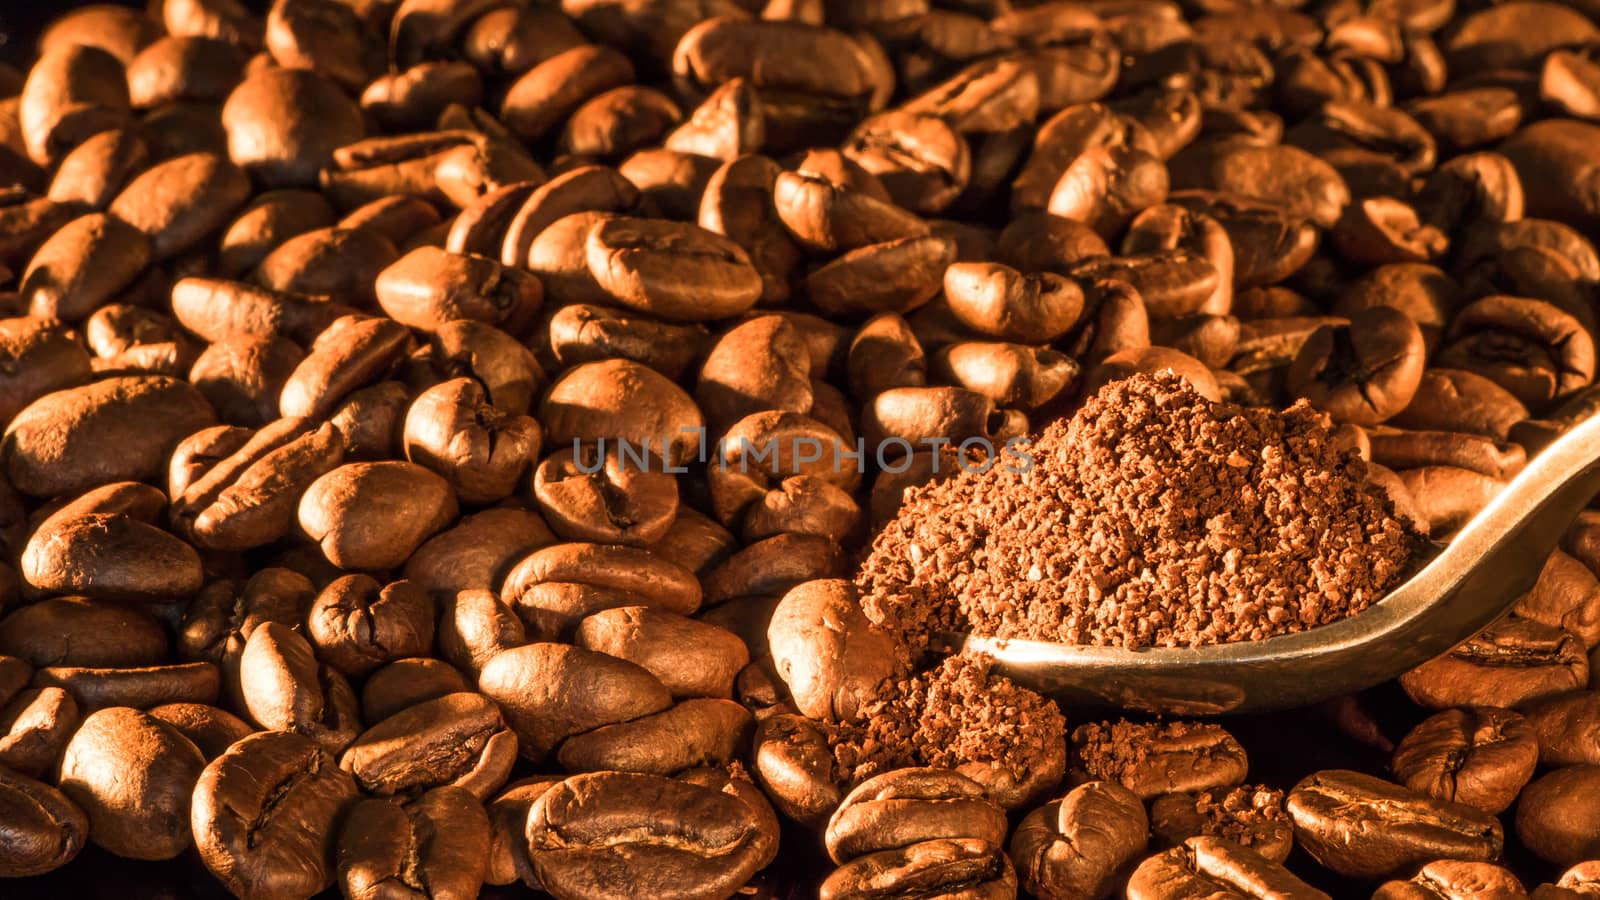 Coffee beans close-up with a spoon of ground coffee.